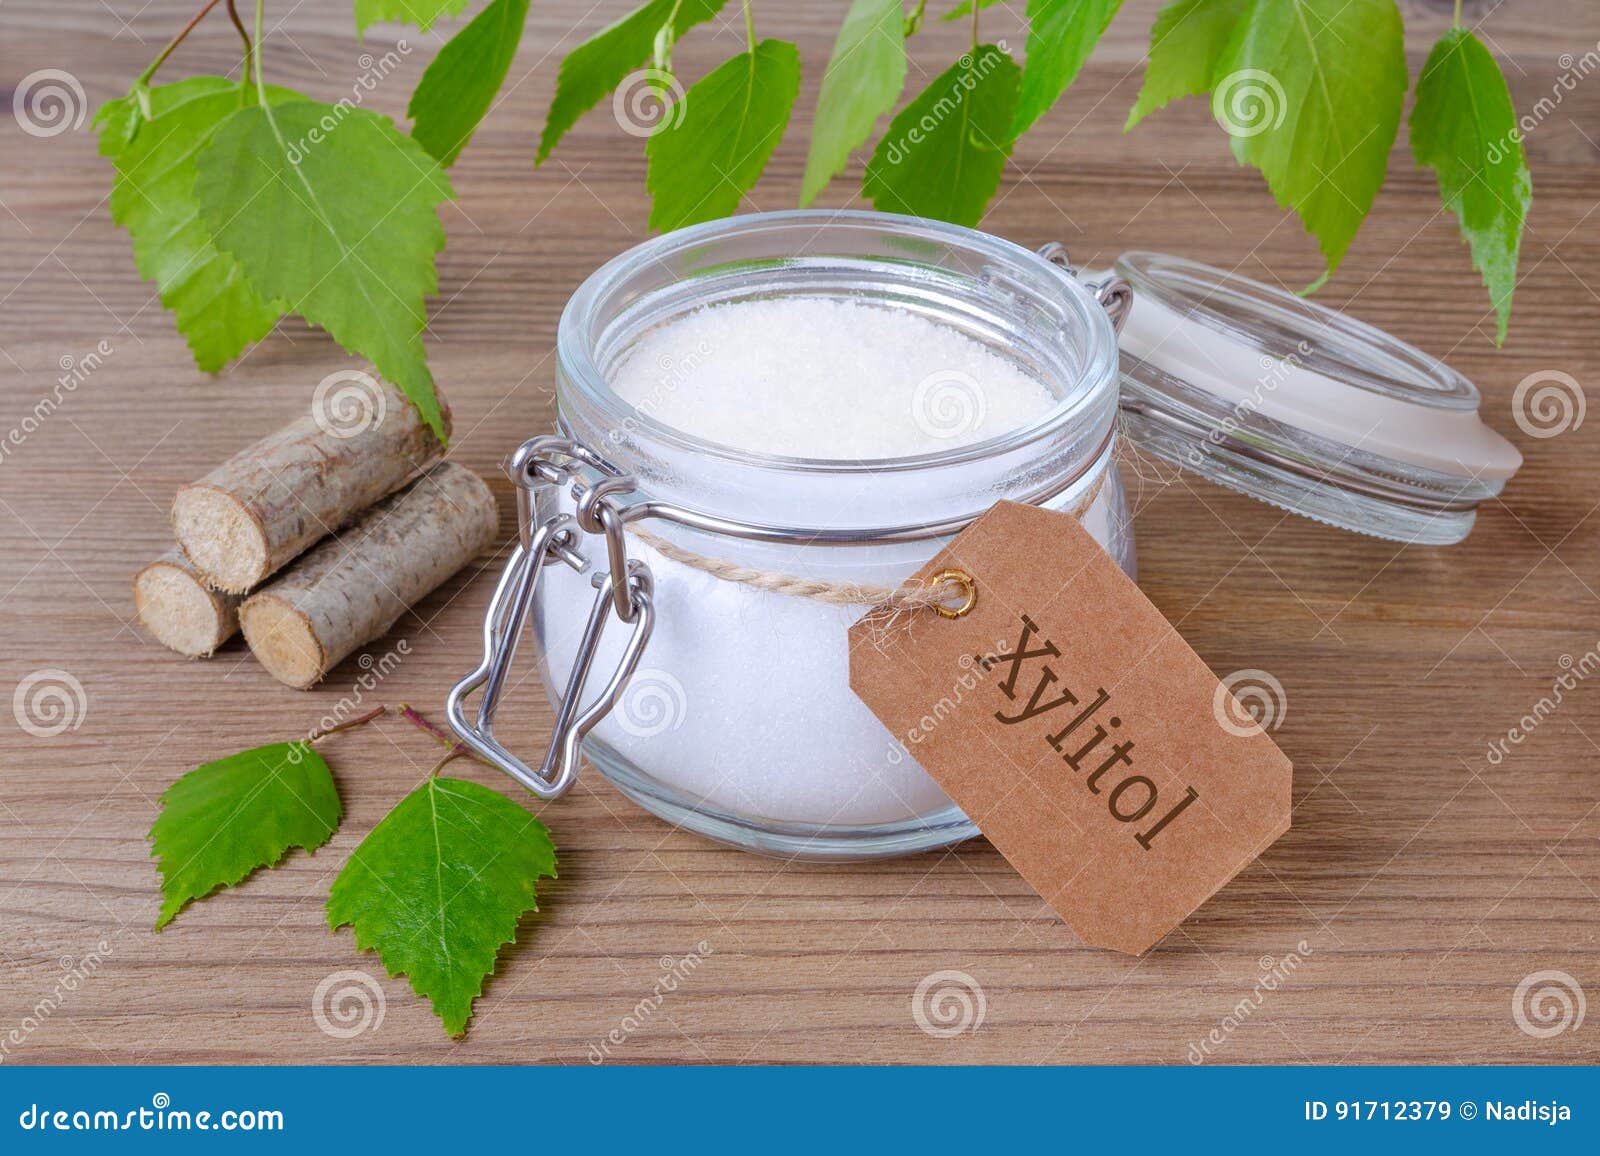 sugar substitute xylitol, a glass jar with birch sugar, liefs and wood